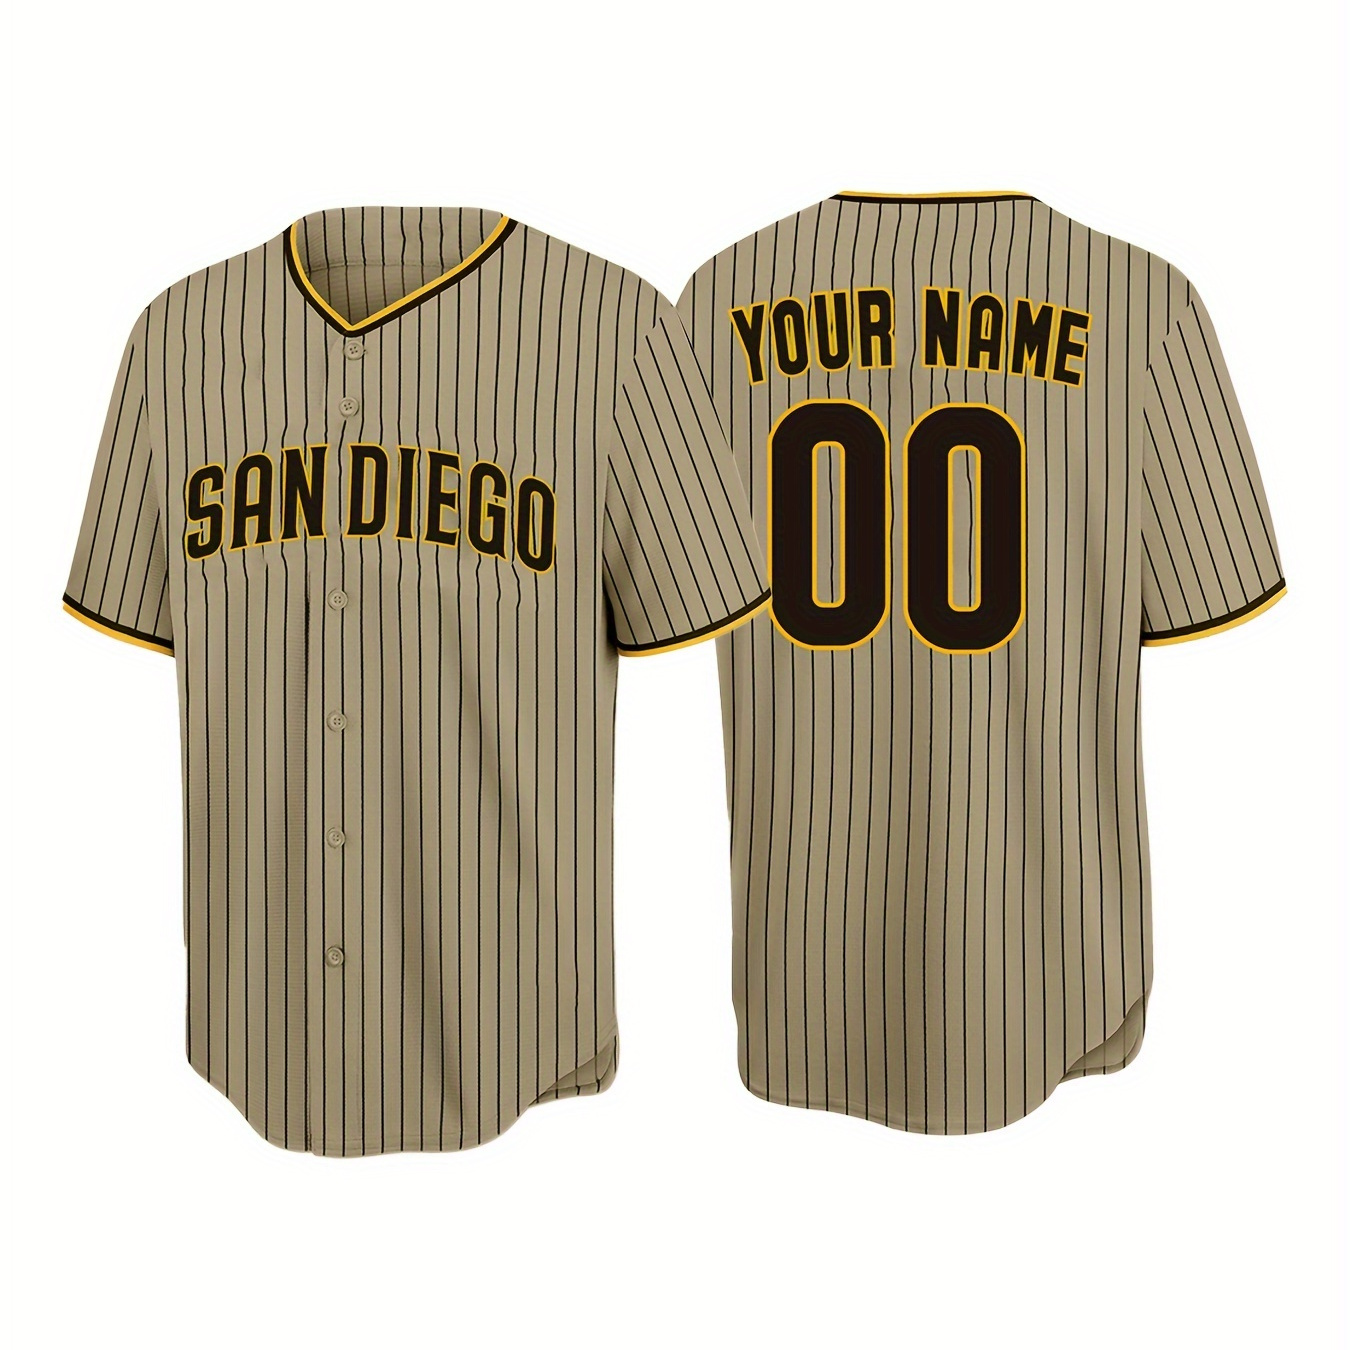 

Men's Customized Name & Number Embroidery "san " Baseball Jersey, Tailored To Your Preference, Comfy Top For Summer Sport